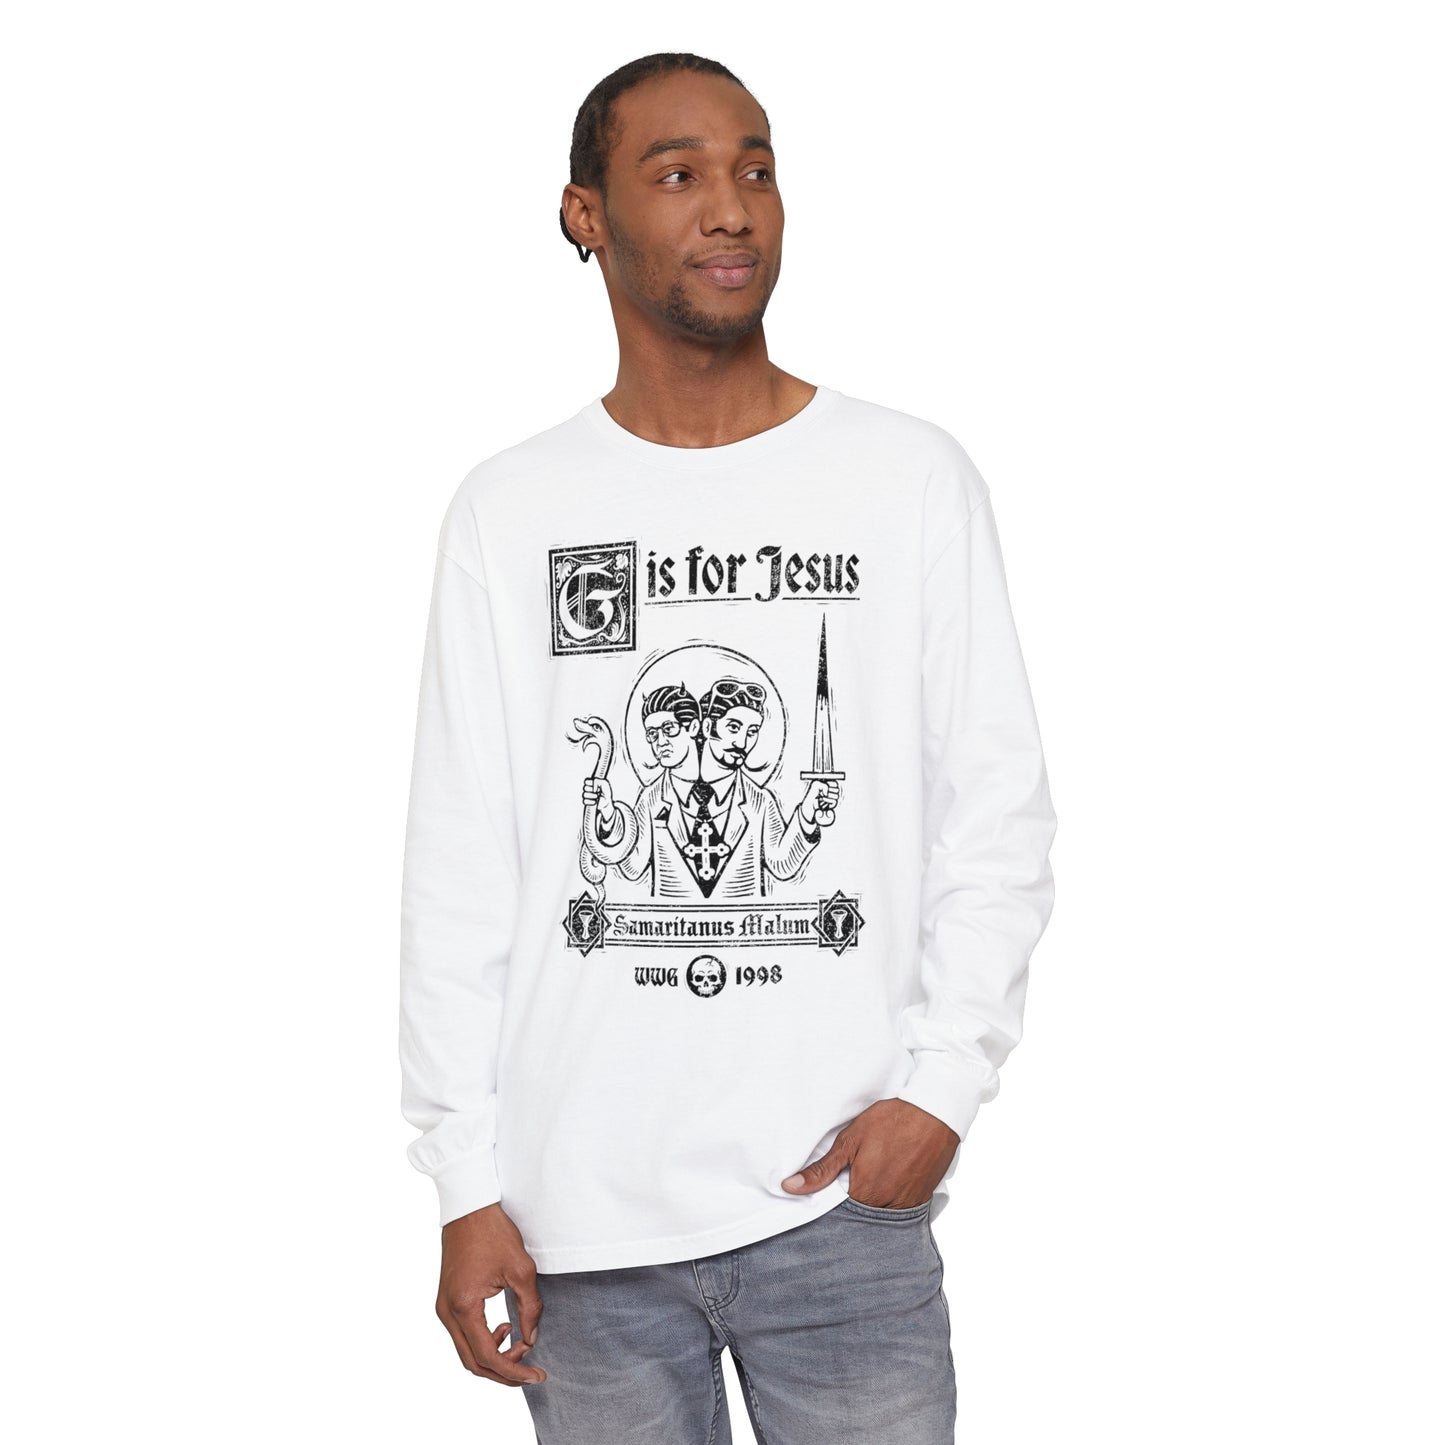 G is for Jesus Long Sleeve T-Shirt